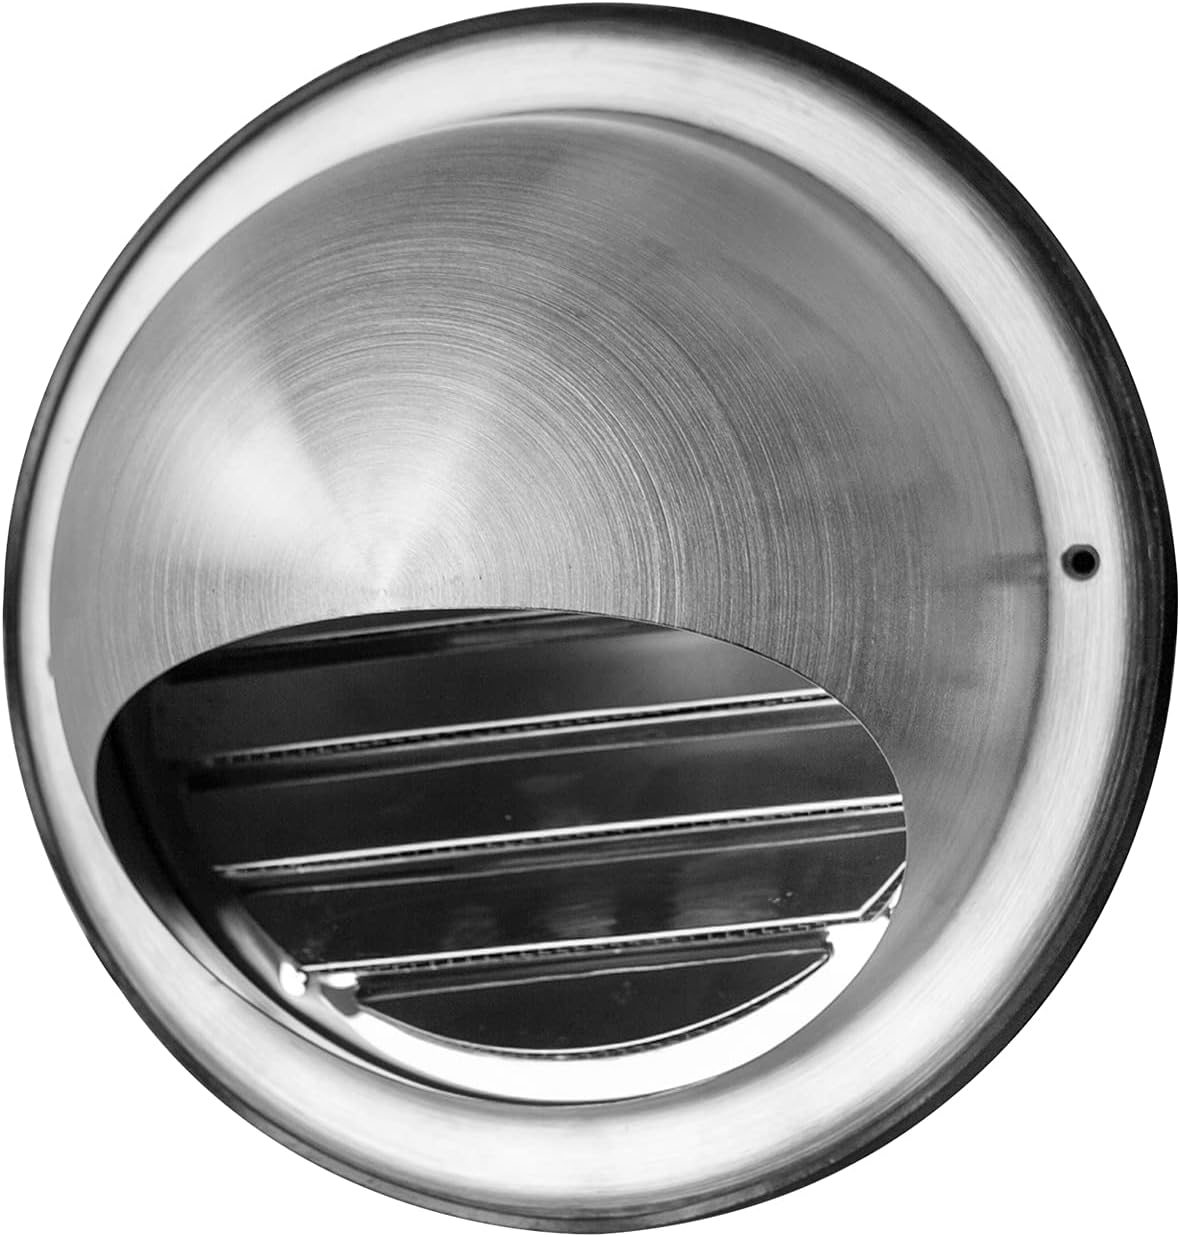 FRESH SPEED 4-Inch Round Stainless Steel Dryer Vent Covers Ventilation Grill Hood for Home